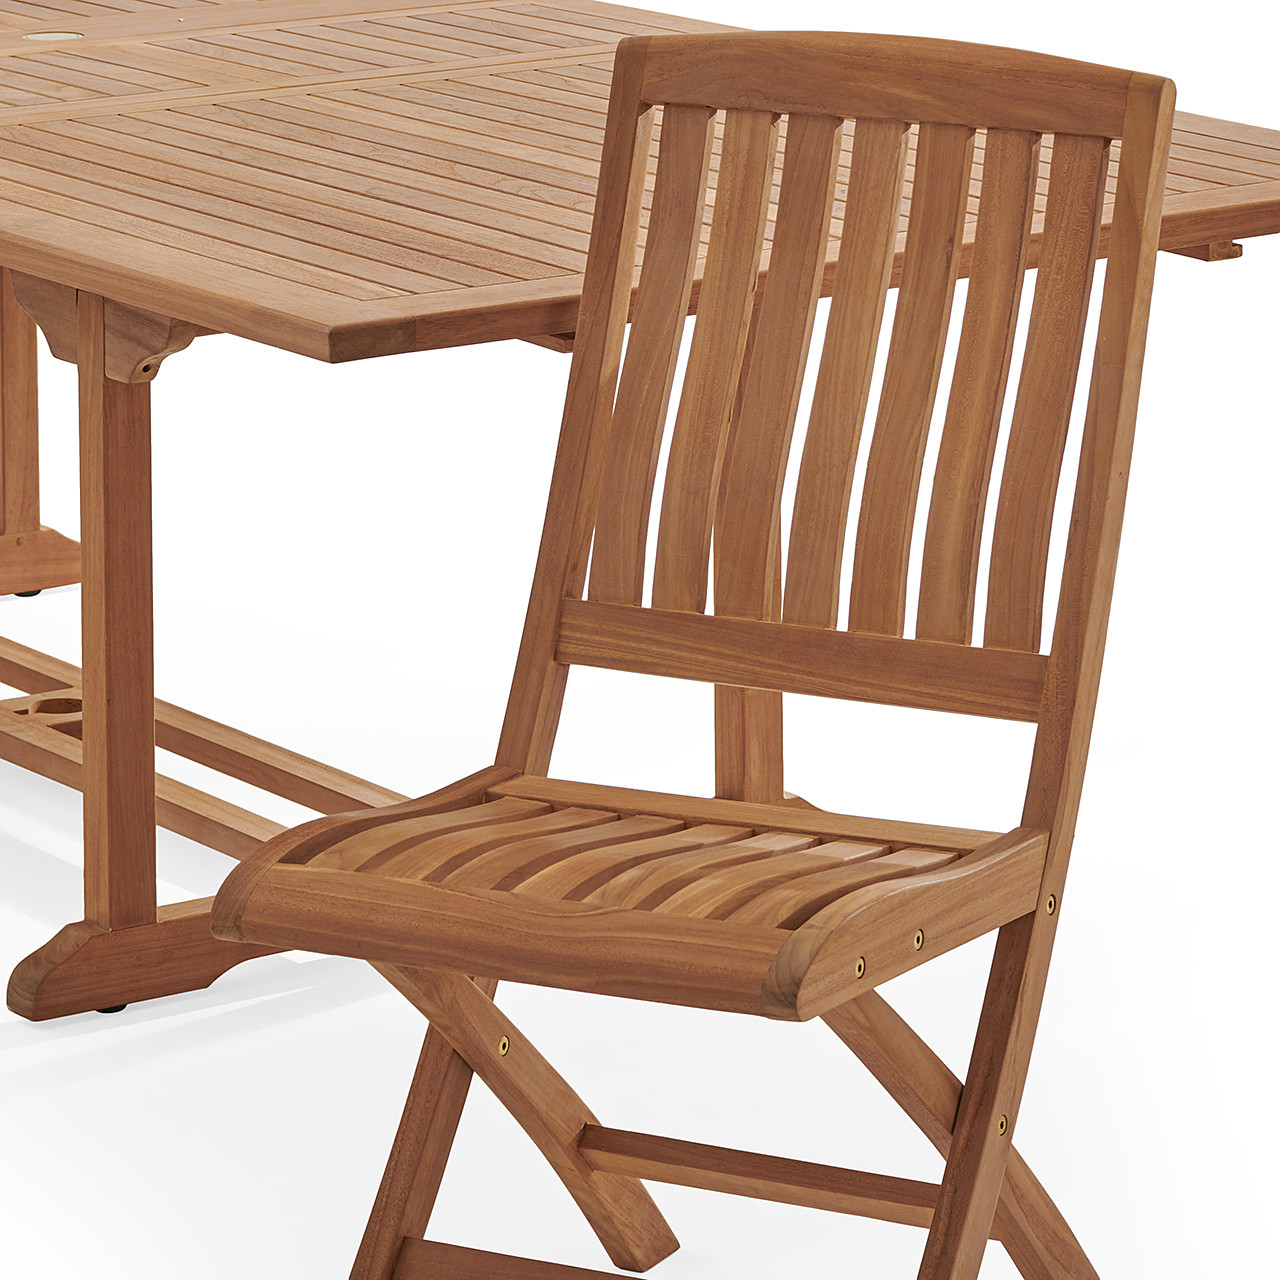 Westport Teak with Cushions 9 Piece Armless Dining Set + Bristol 87-118 x 47 in. Extension Table